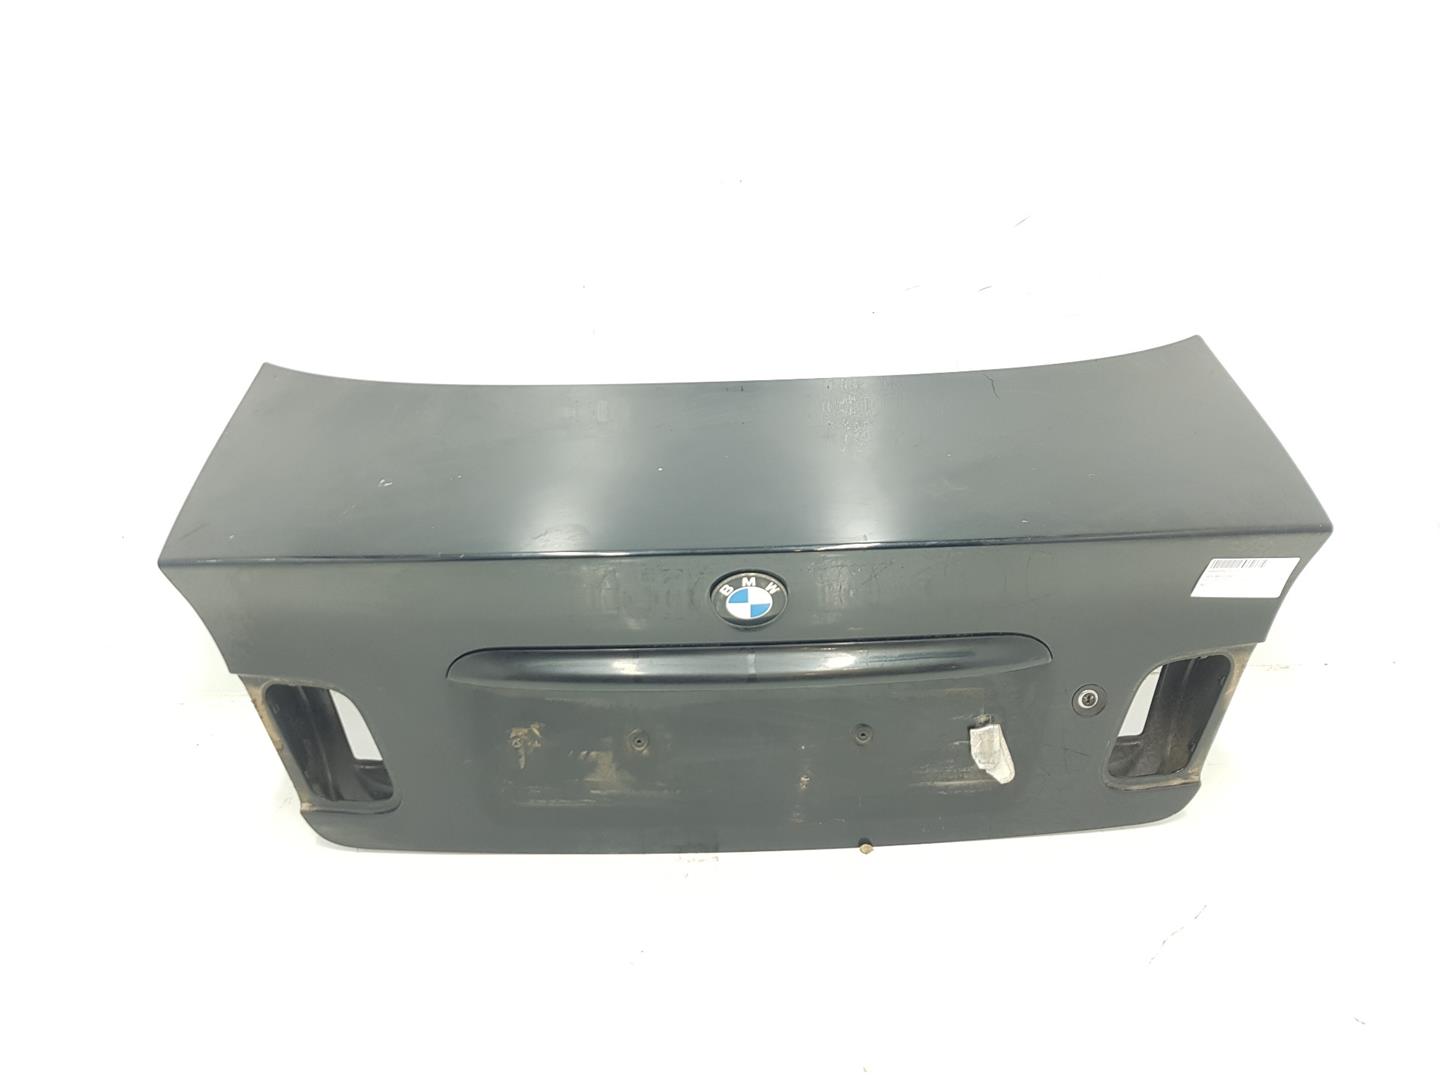 BMW 3 Series E46 (1997-2006) Bootlid Rear Boot 41627003314, 41627003314, COLORNEGRO475 19849658